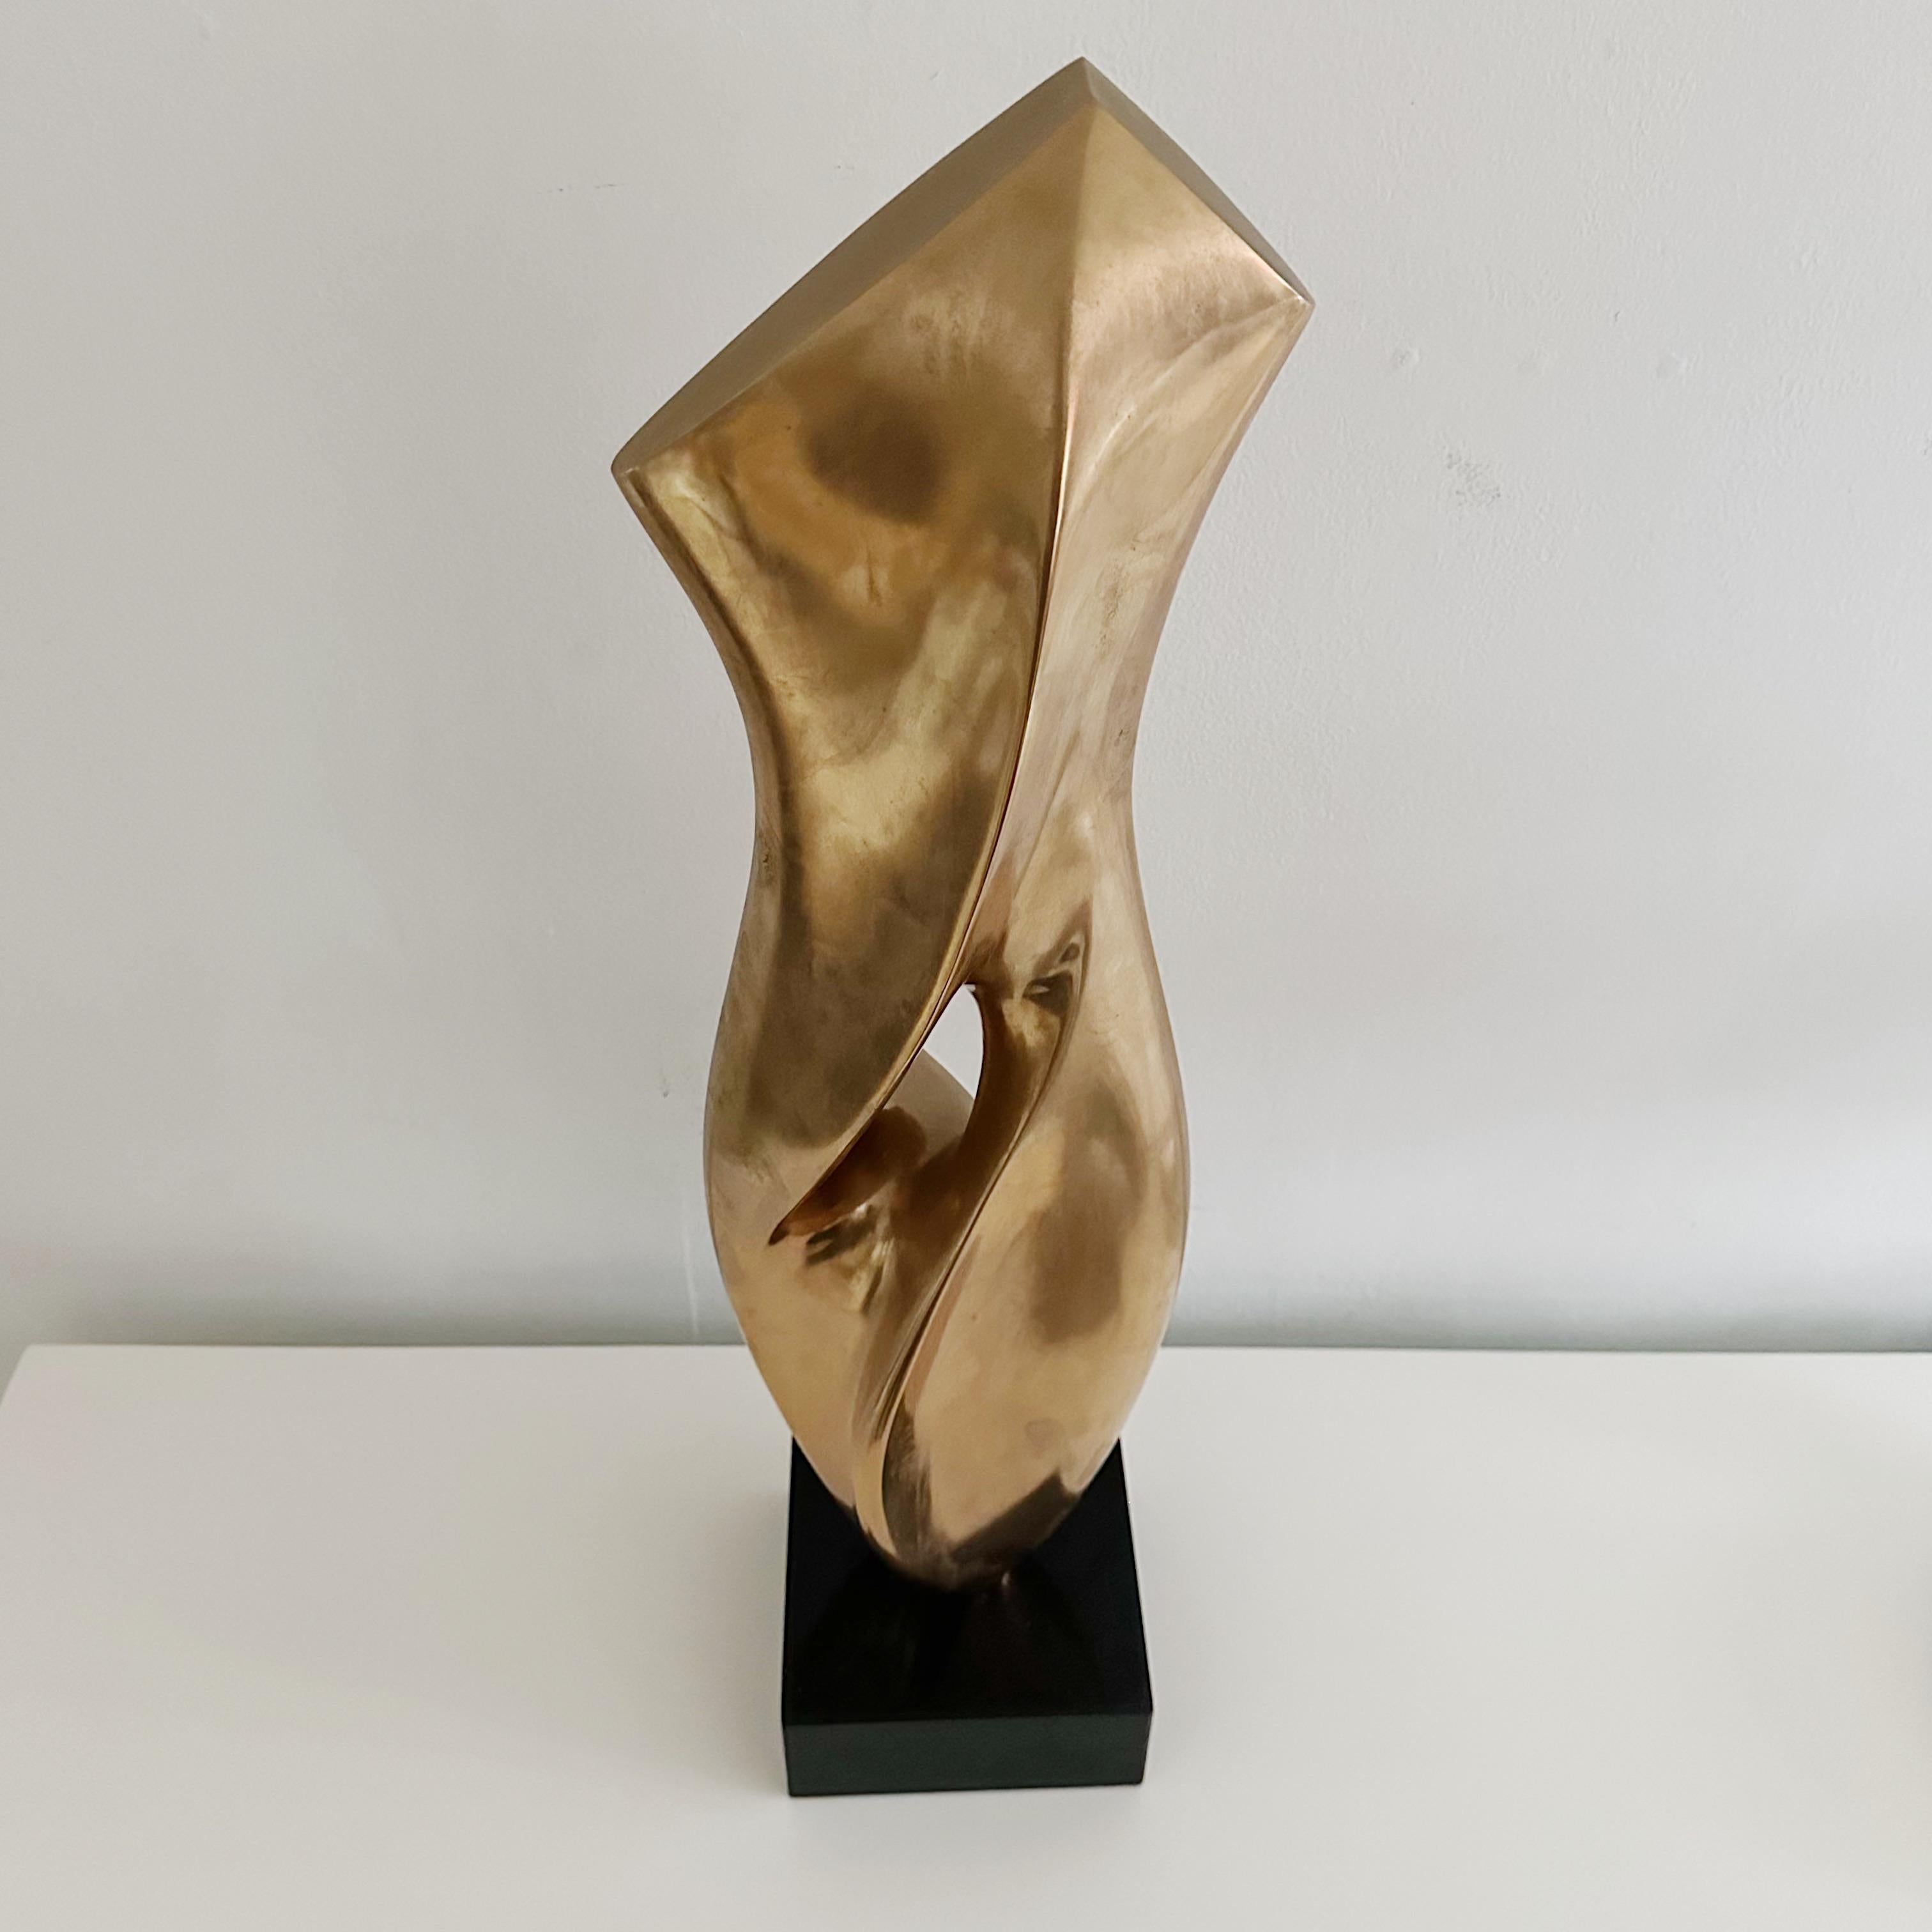 Hand-Crafted Antonio Grediaga Kieff (B 1936) Large Abstract Solid Polished Bronze Sculpture